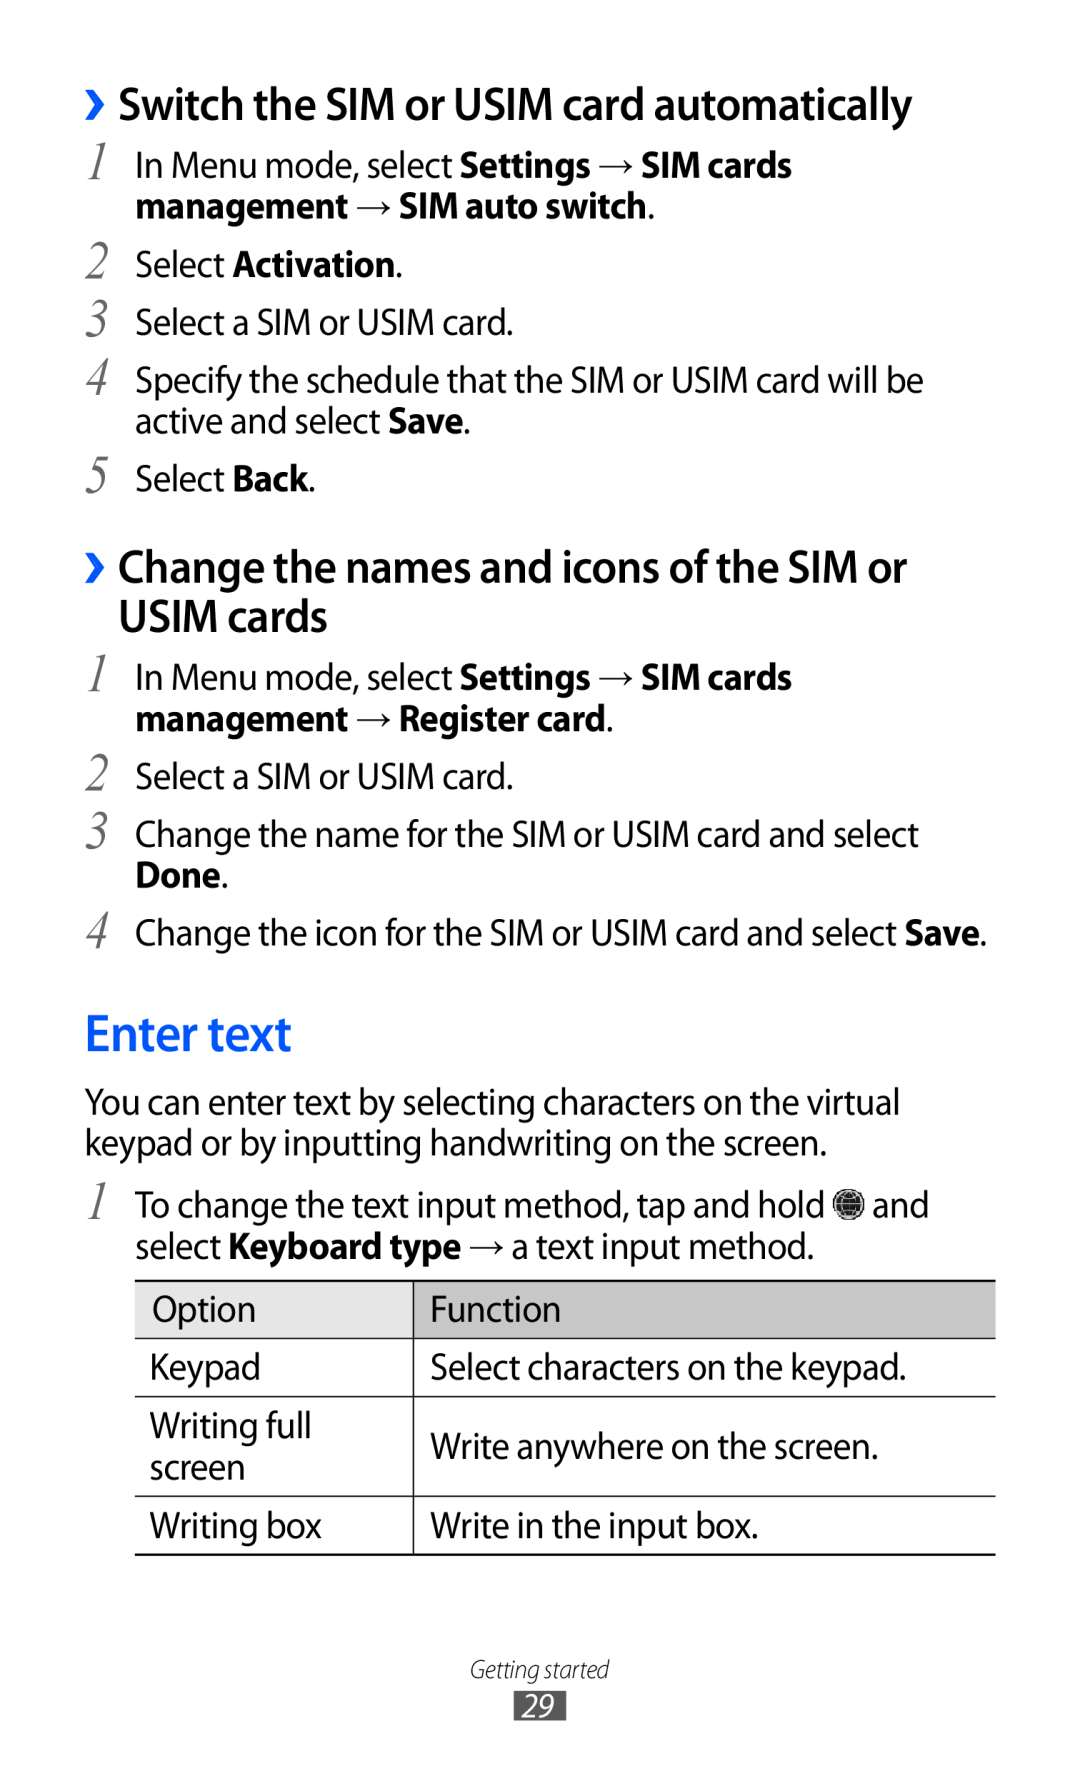 Samsung GT-C6712LKASEB, GT-C6712LKACIT Enter text, ››Switch the SIM or USIM card automatically, Select Activation, Done 